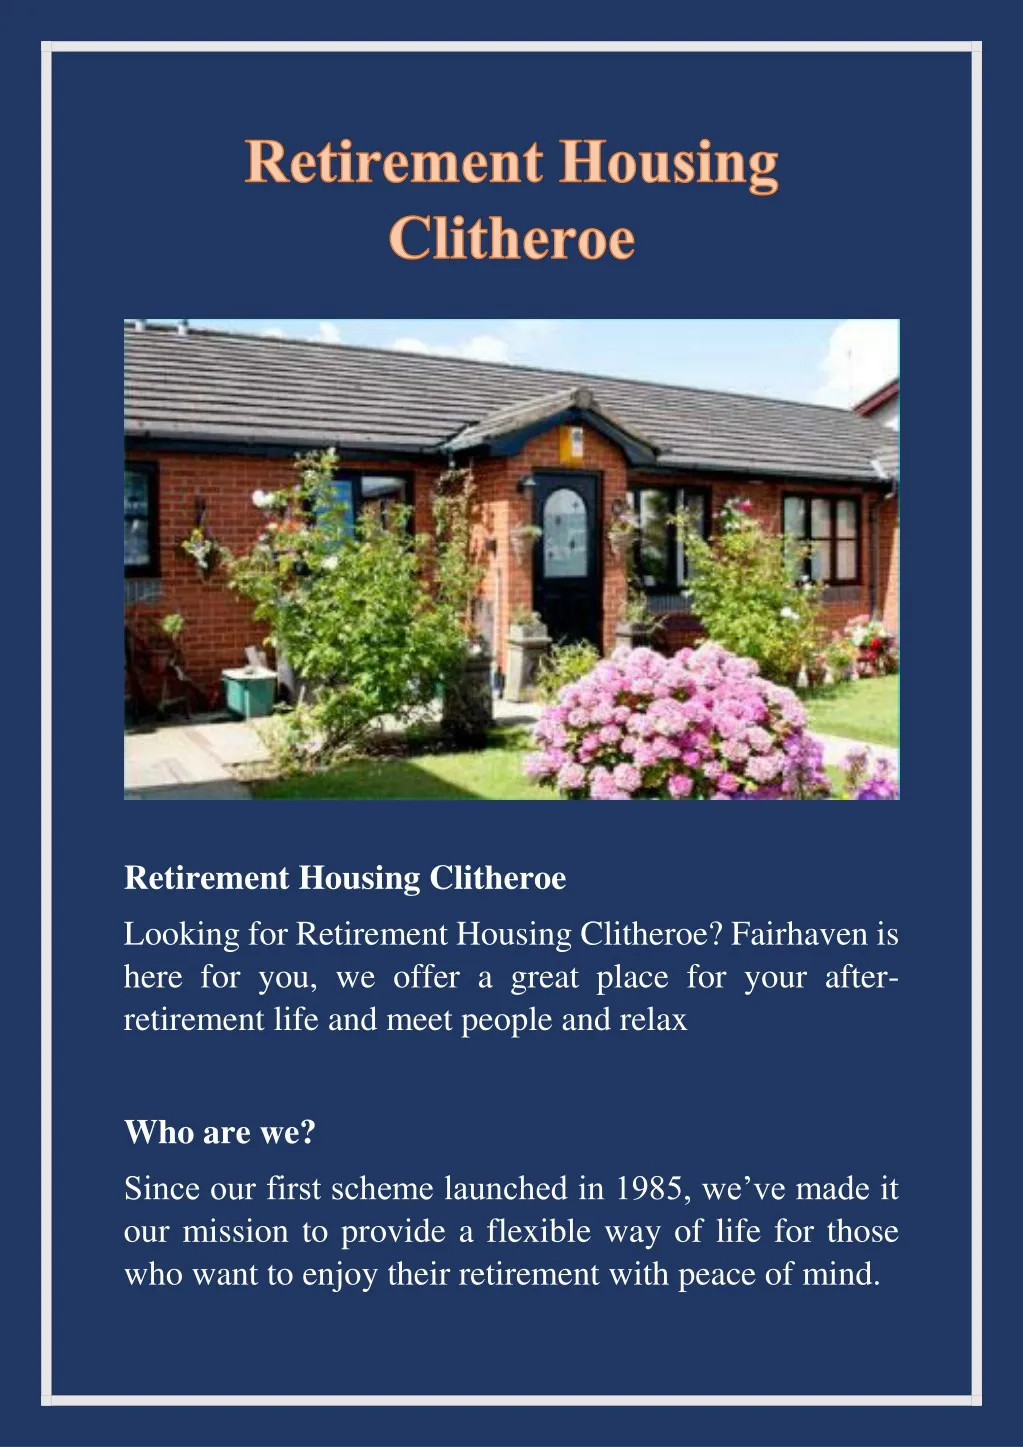 retirement housing clitheroe looking